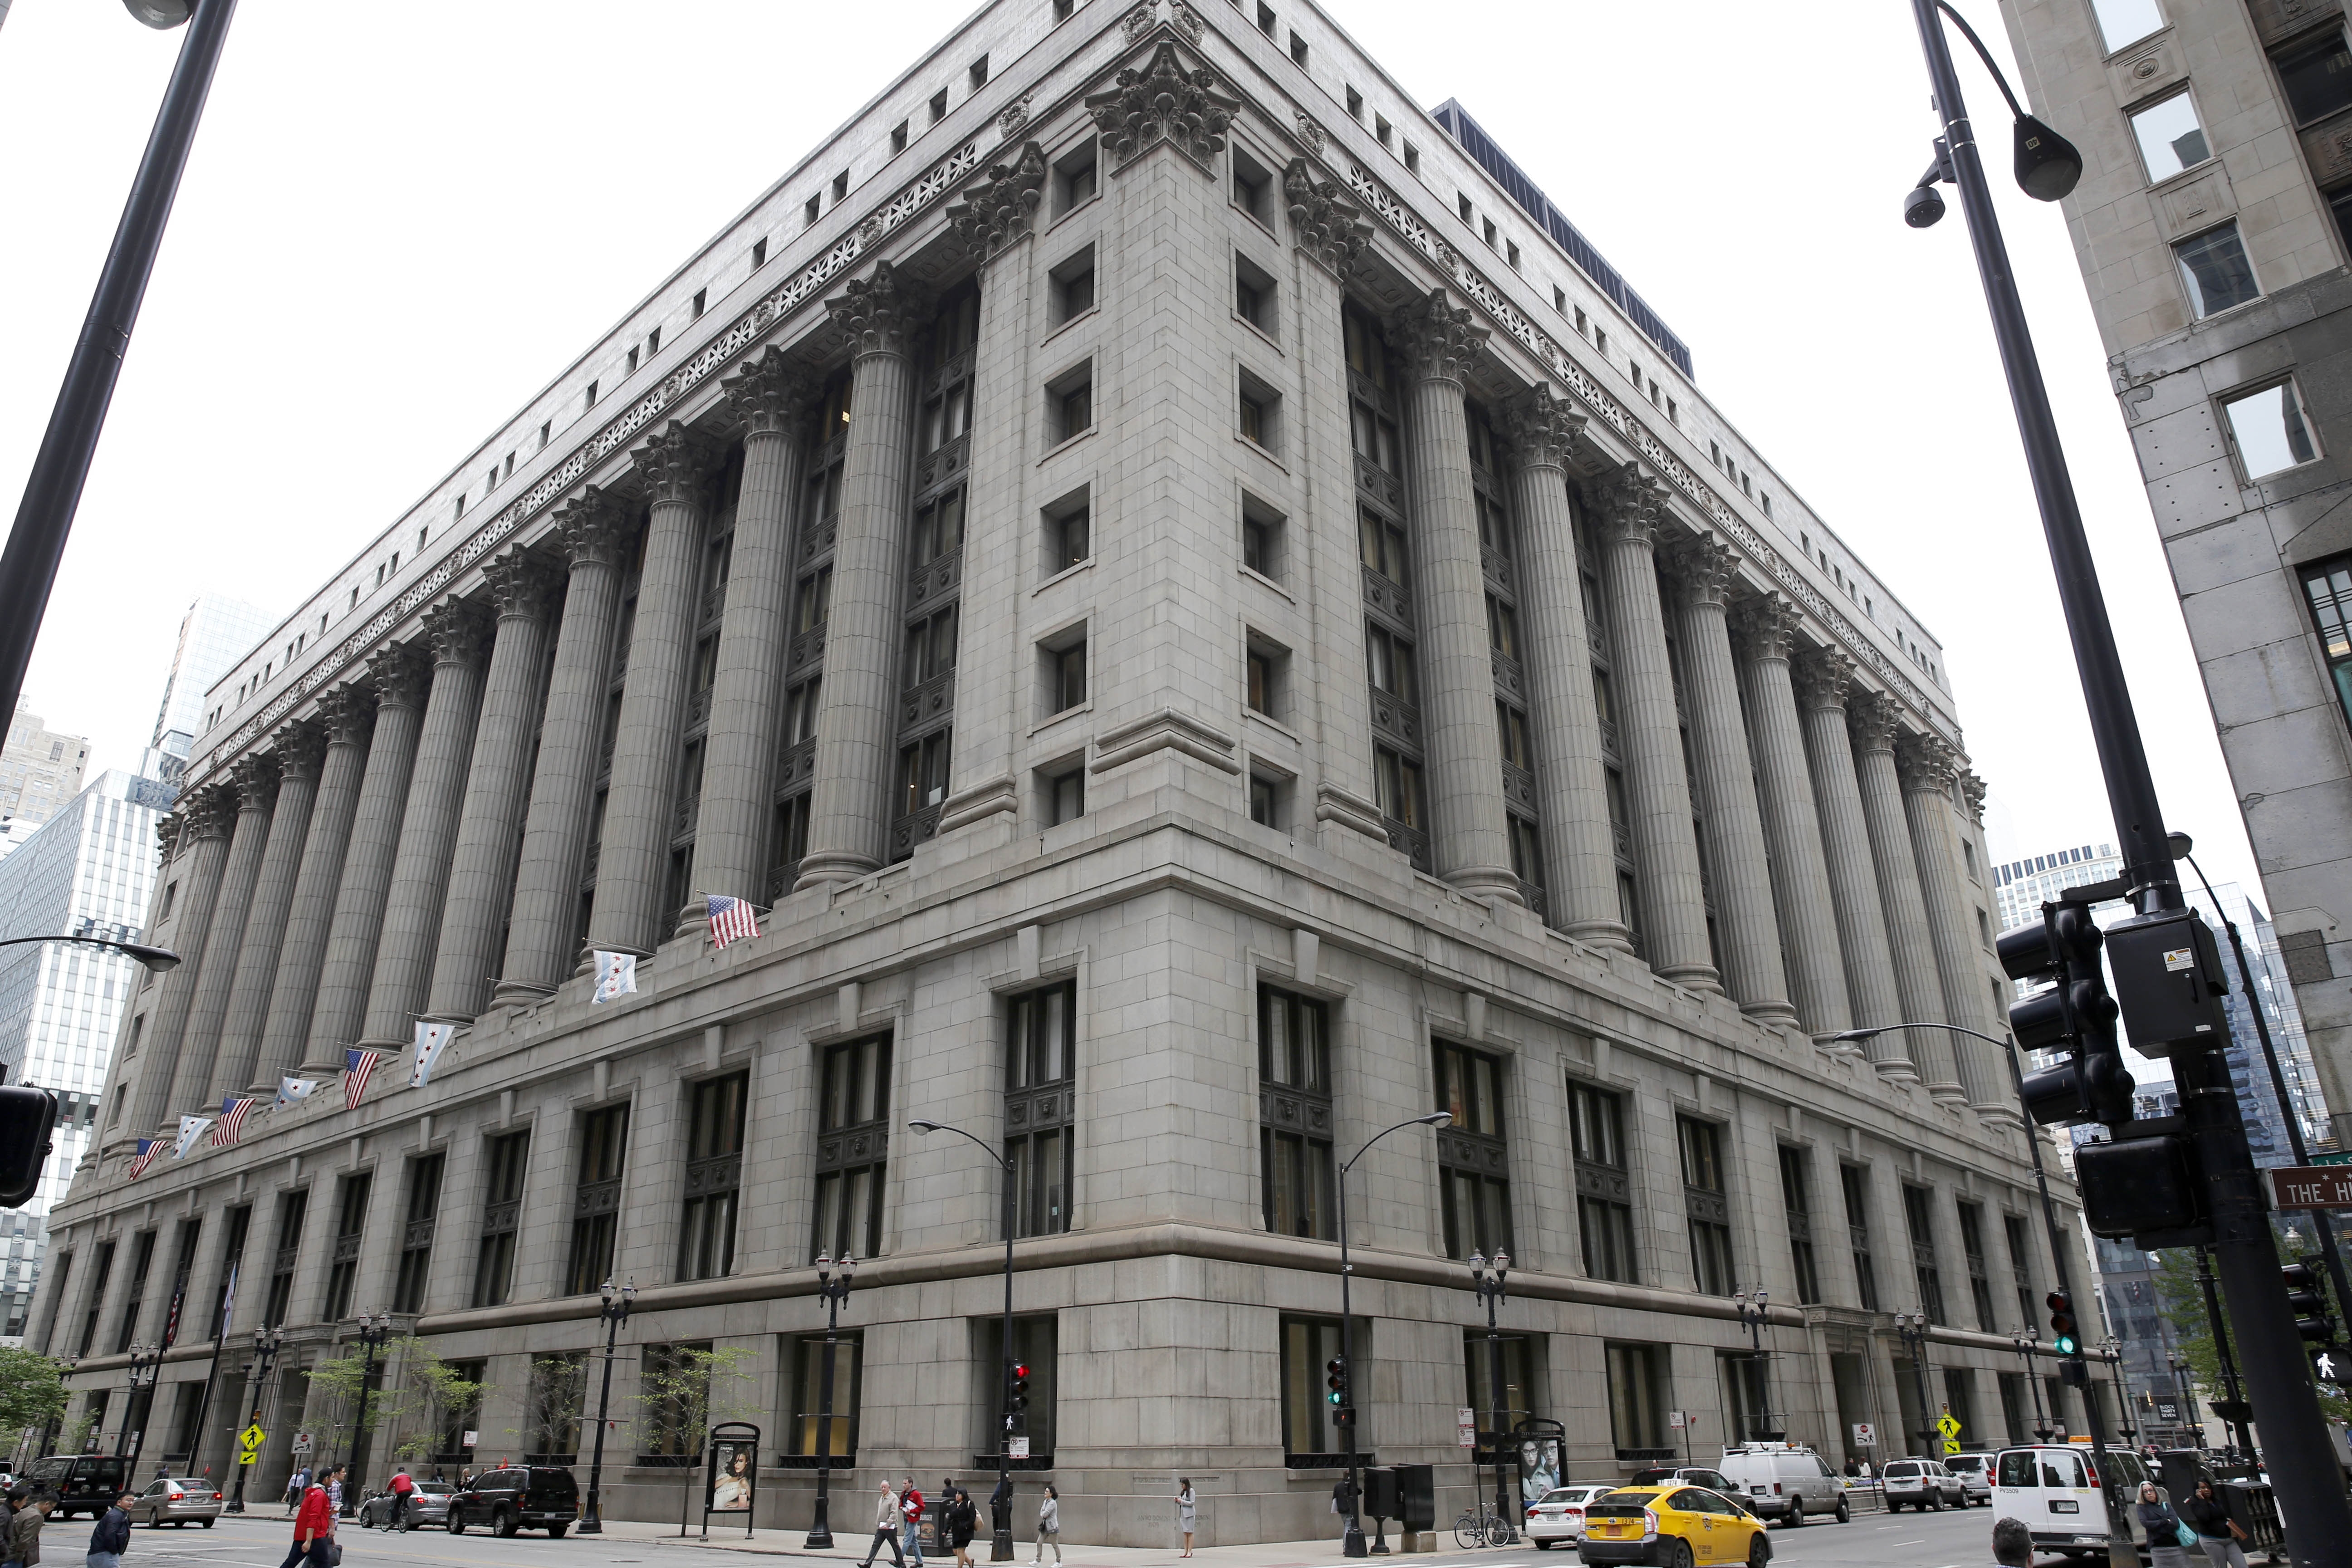 Photo shows the exterior of Chicago’s City Hall in Chicago which has grey stone, large columns, and windows.